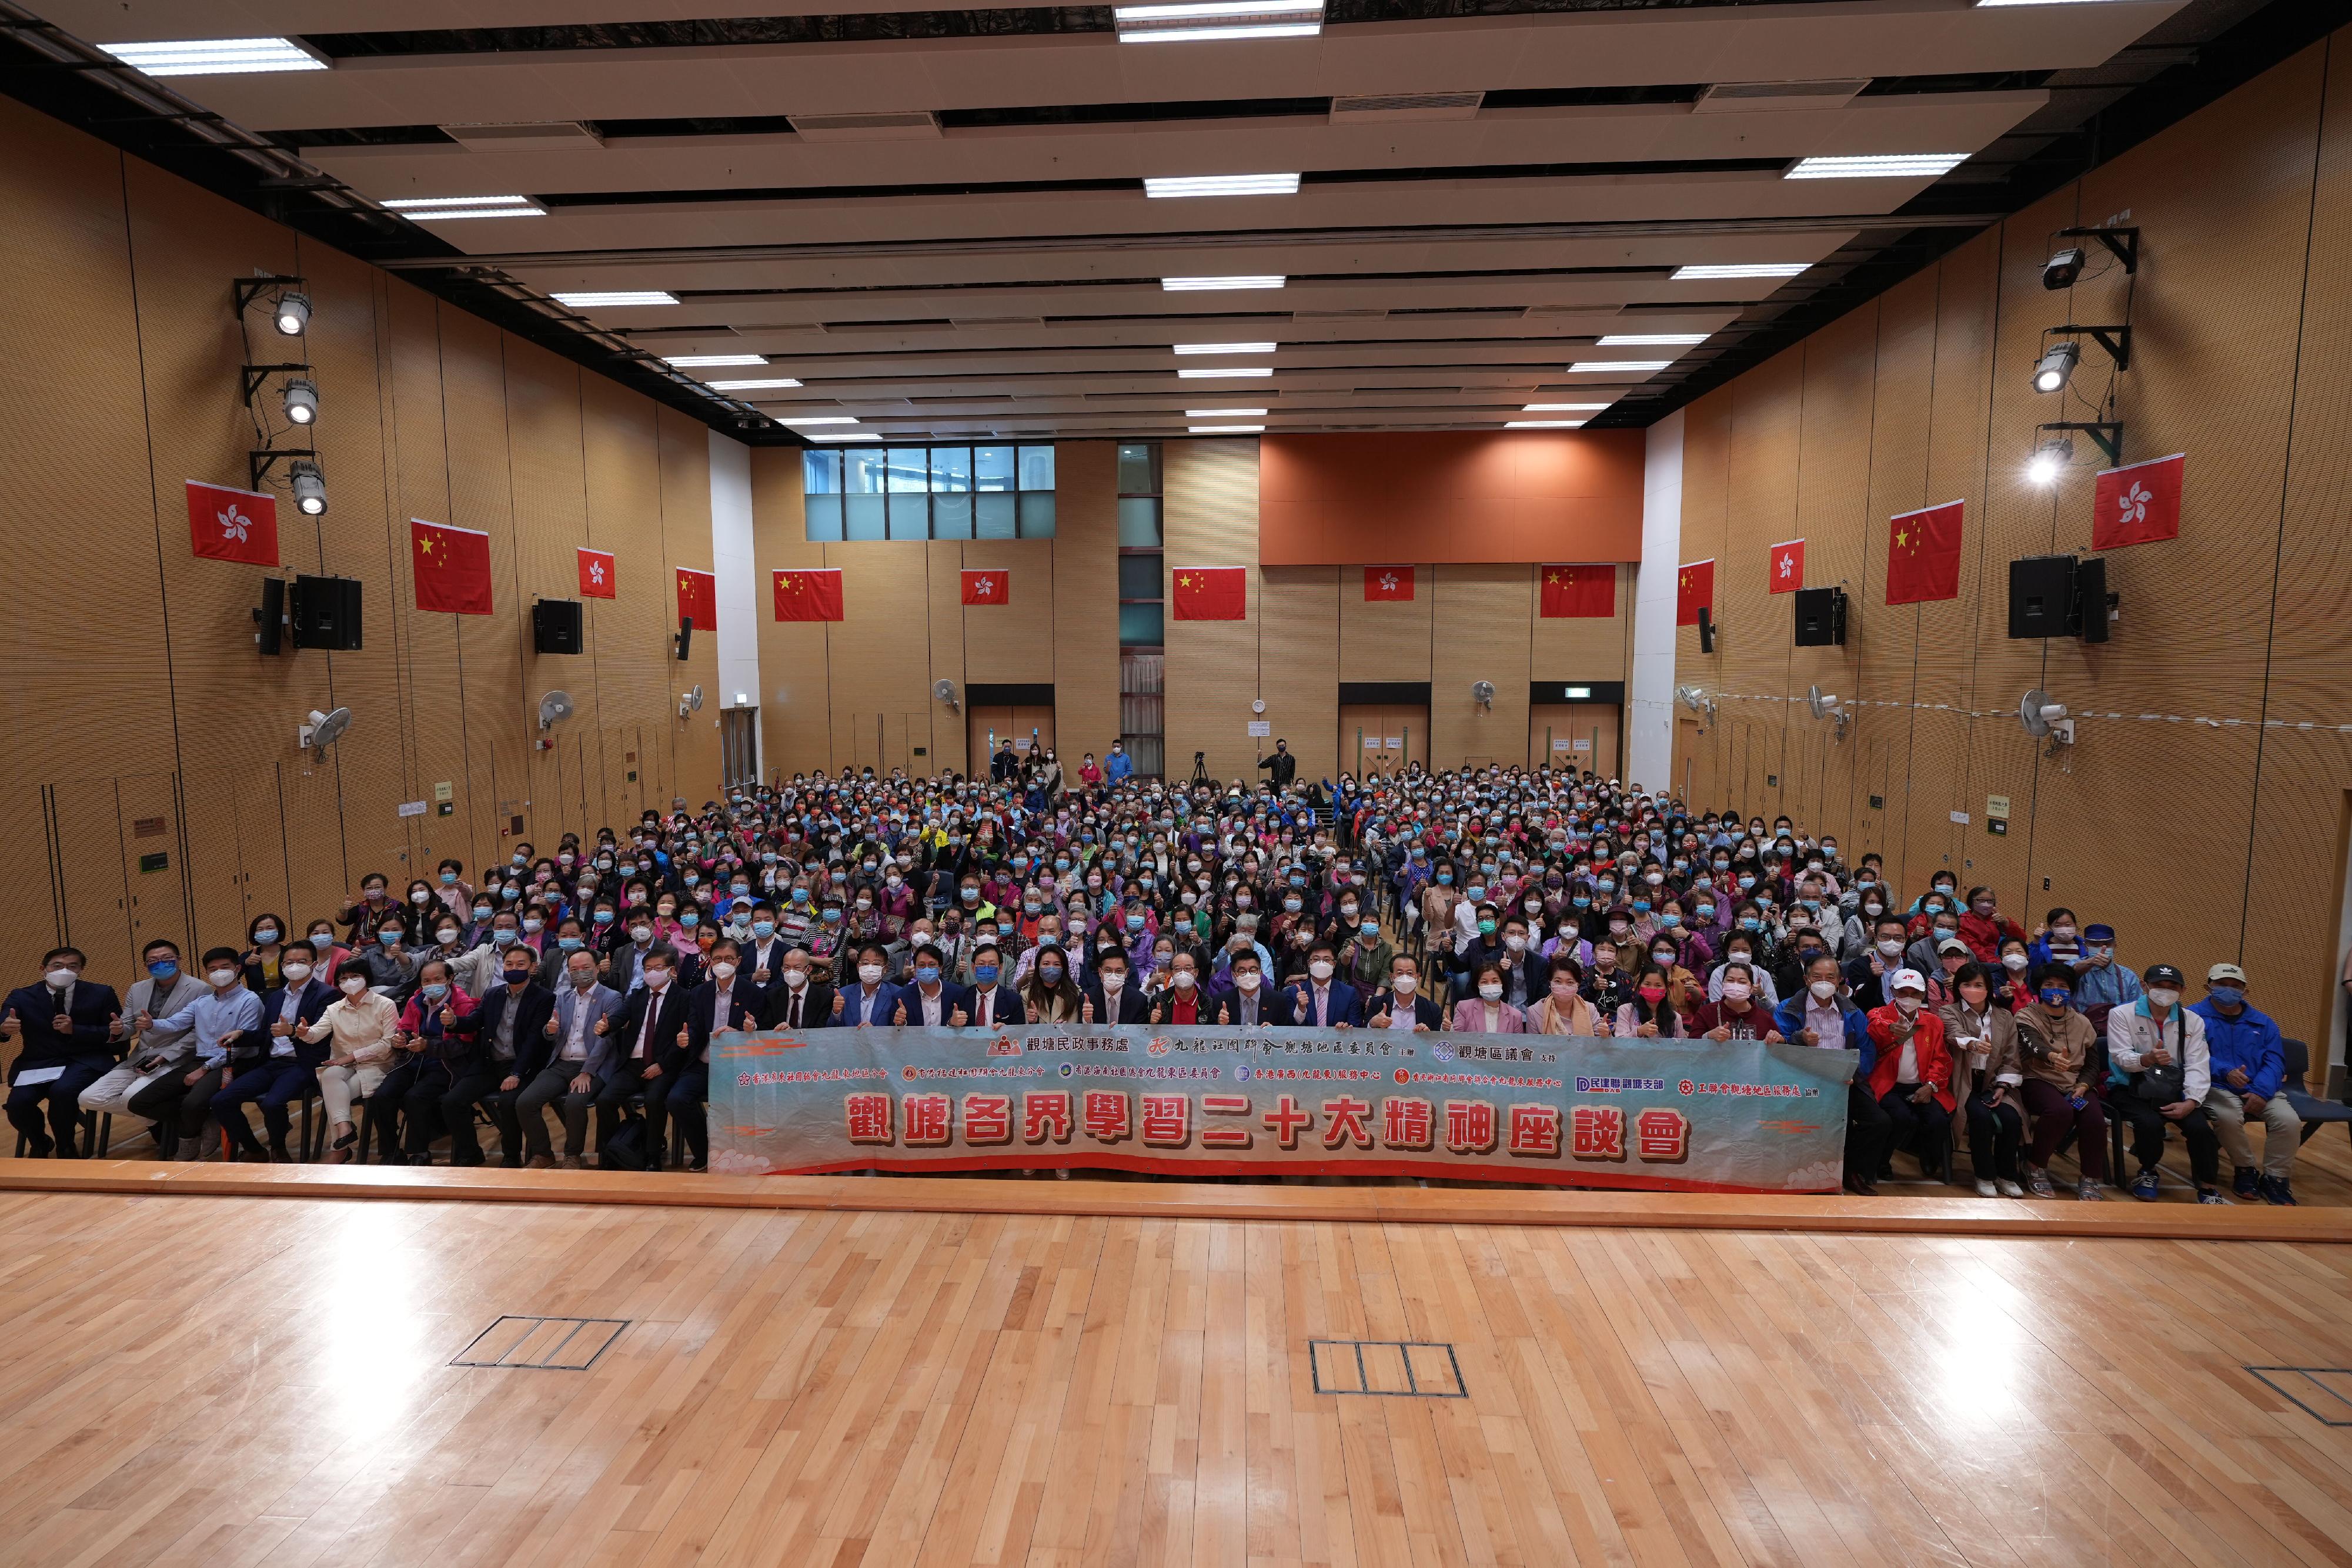 The Kwun Tong District Office, together with the Kowloon Federation of Associations Kwun Tong District Committee, held a session on "Spirit of the 20th National Congress of the CPC" at Sau Mau Ping Community Hall today (November 3). Photo shows the guests and participants at the session.